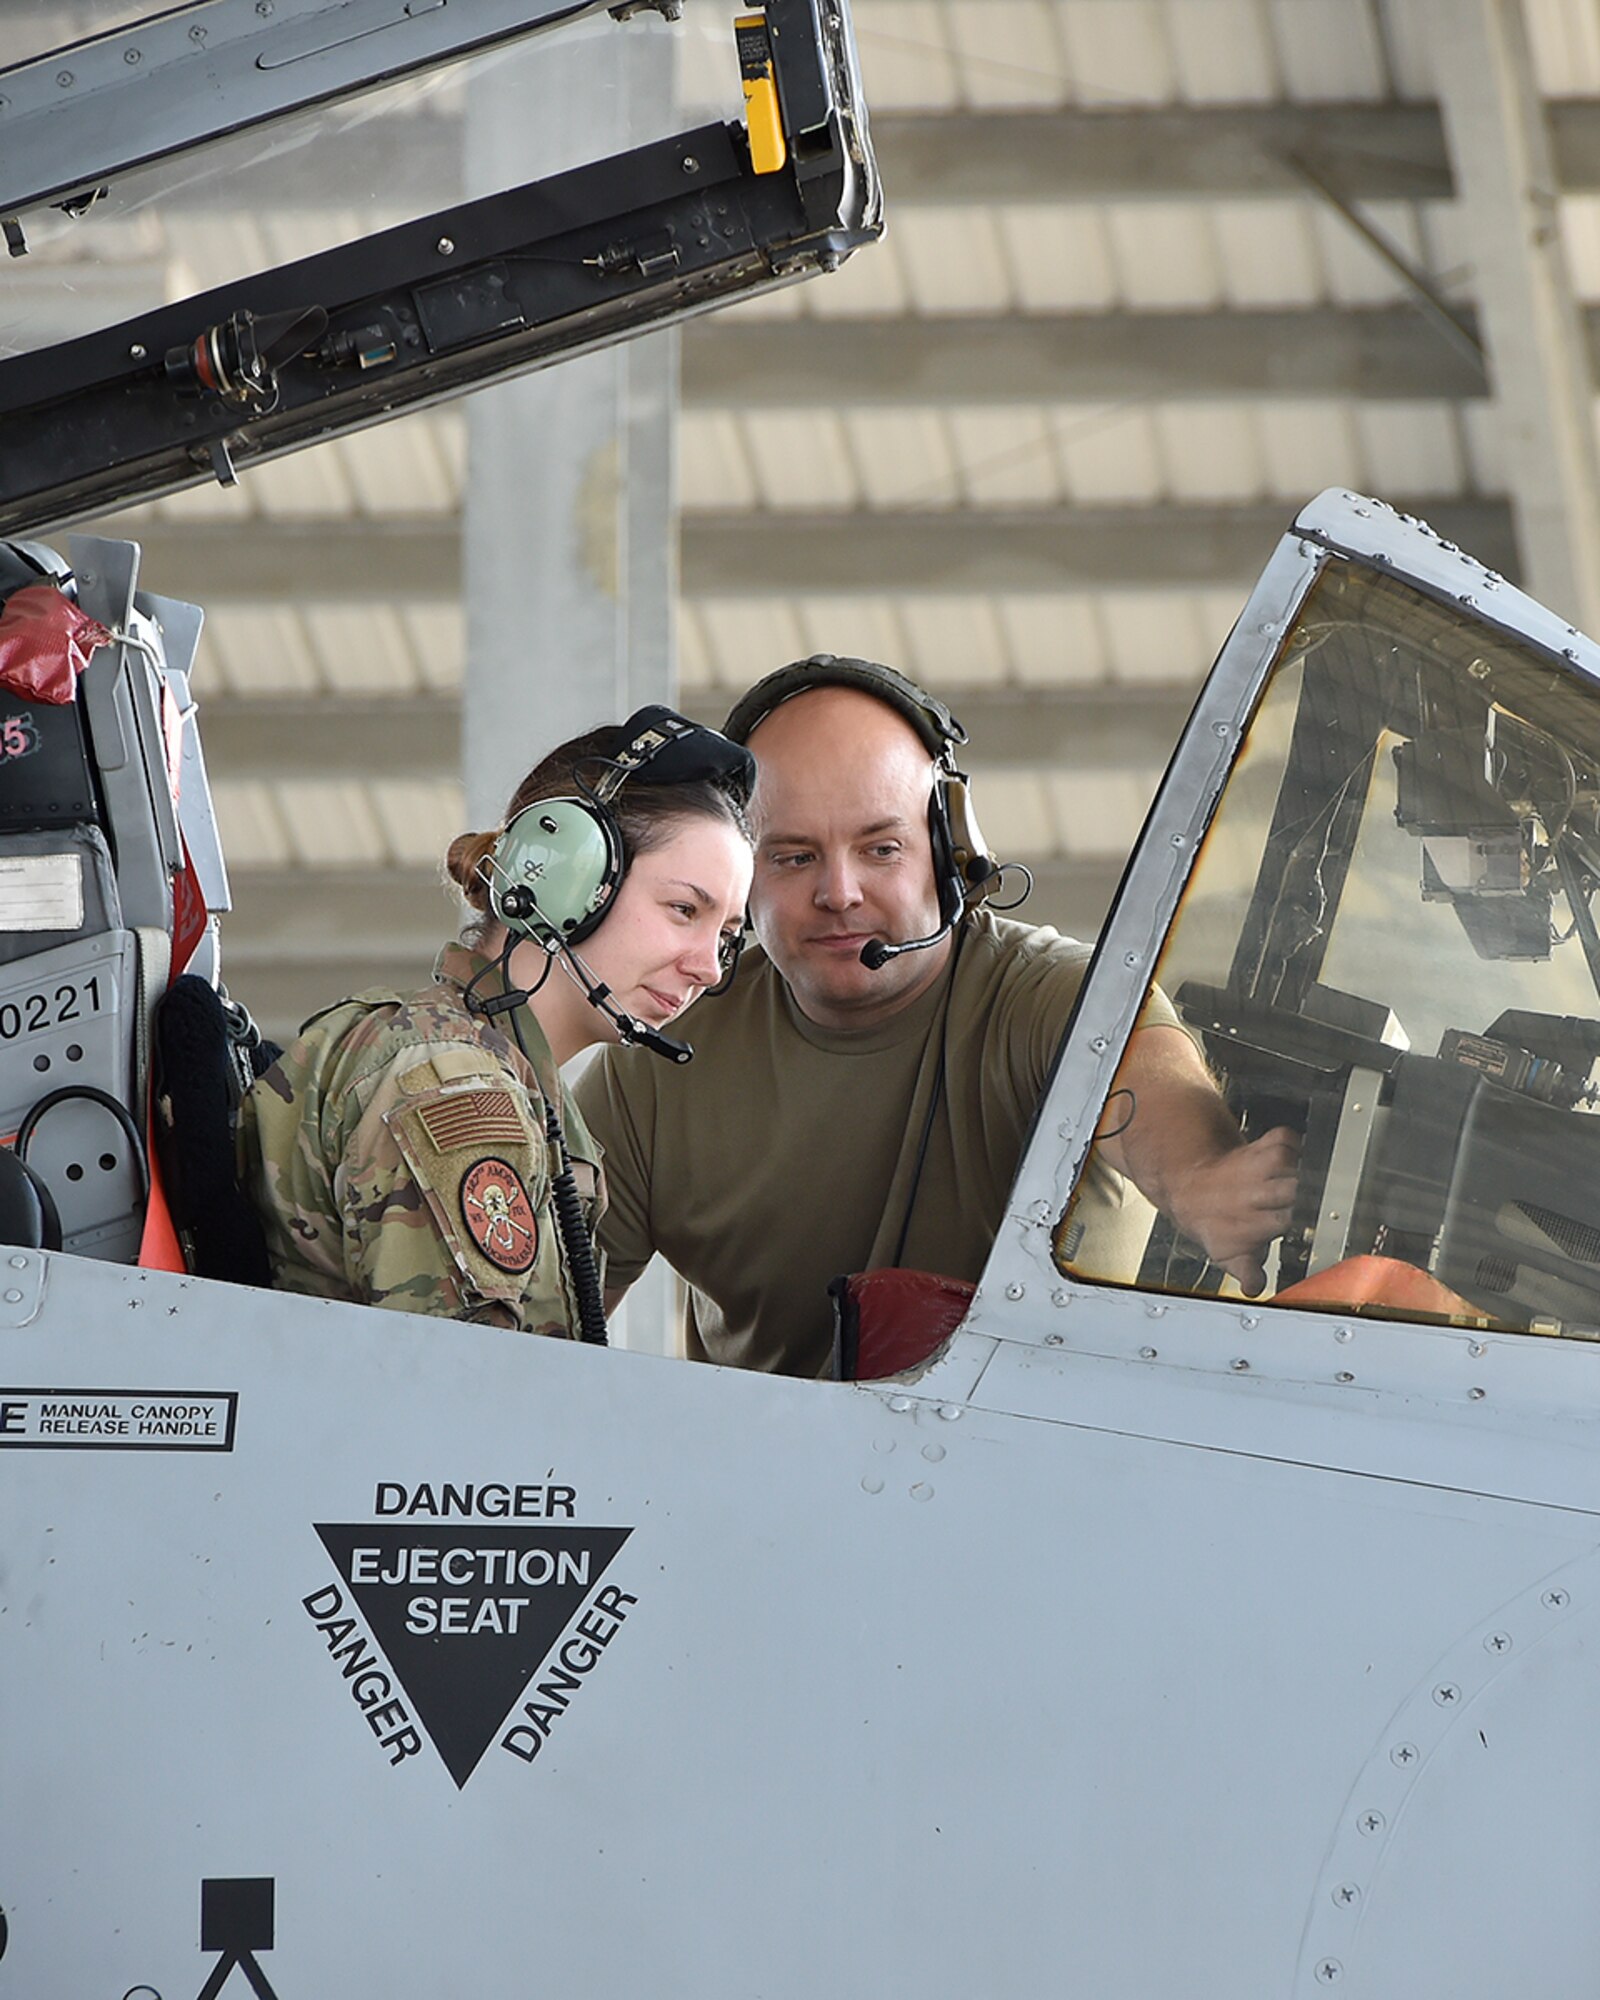 Female Airman sits in cockpit of A-10, looking at controls while male Airman stands over her shoulder pointing to controls he is familiarizing her with.